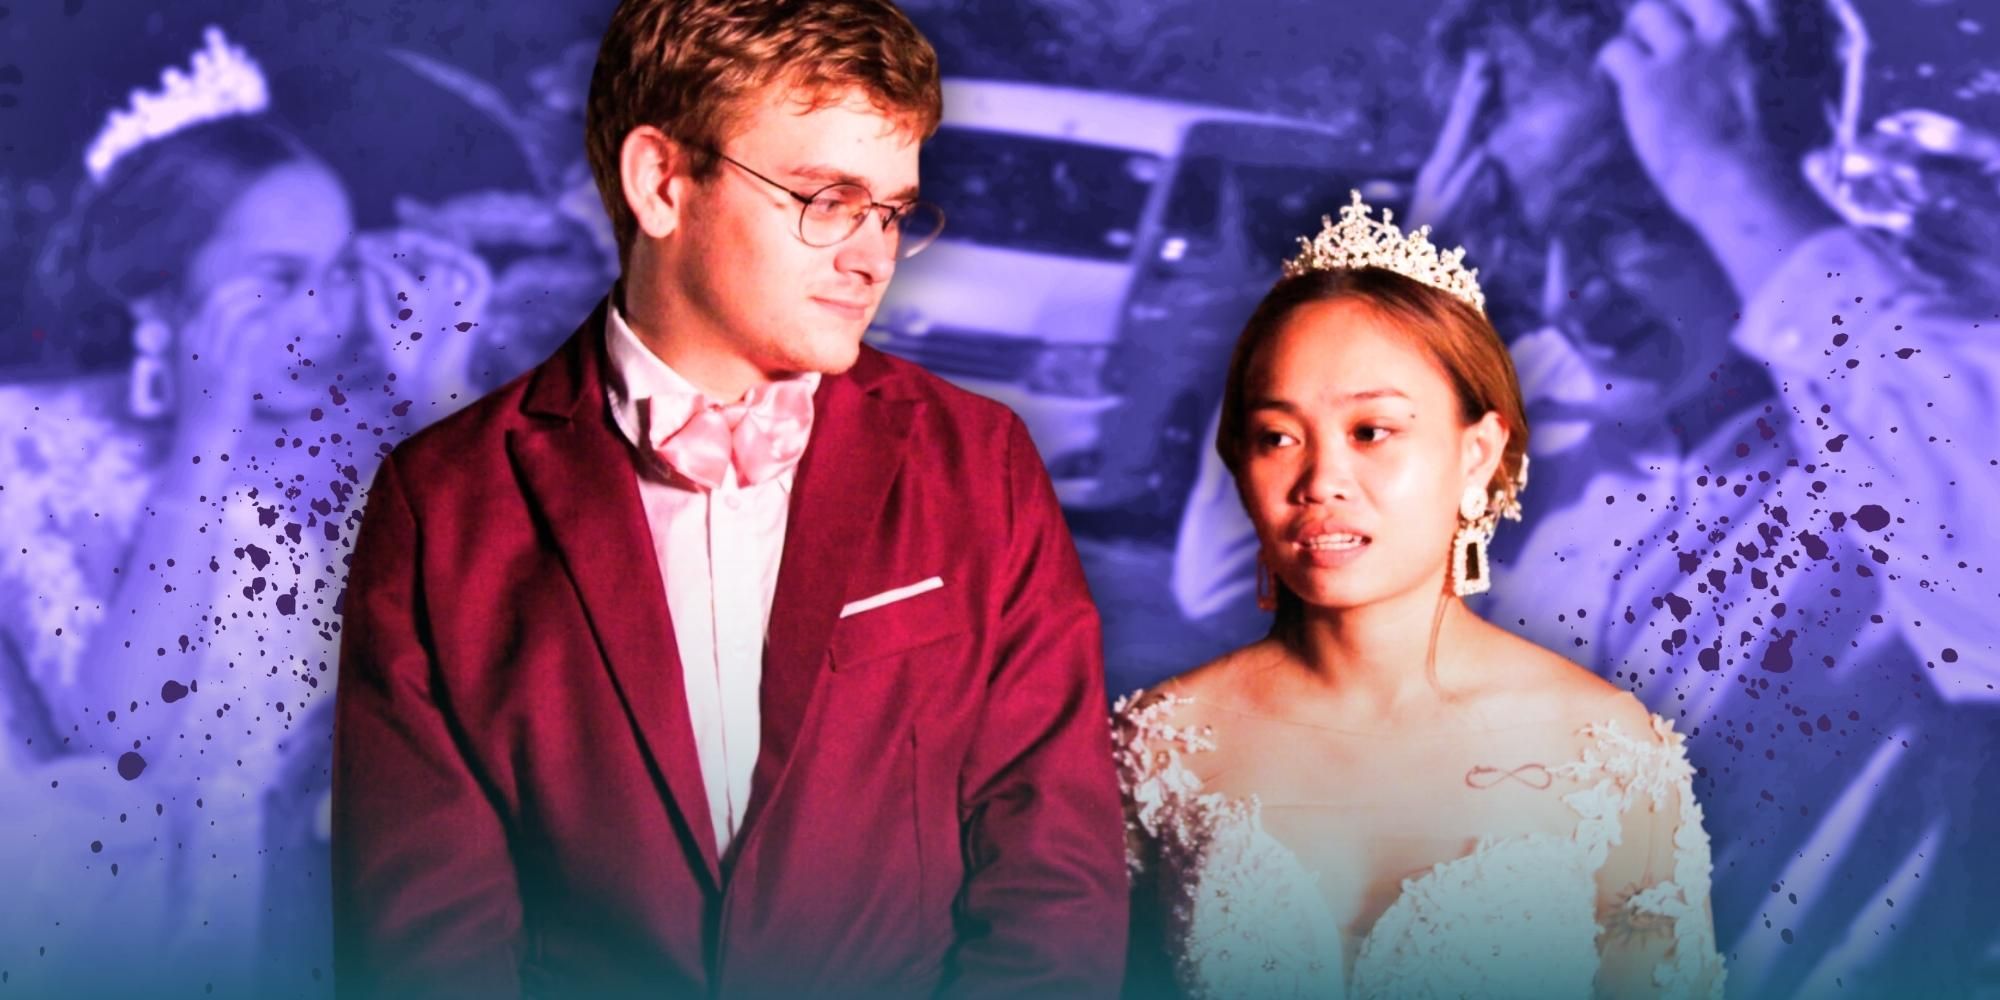 Montage of Mary & Brandan from 90 Day Fiance getting married in wedding attires